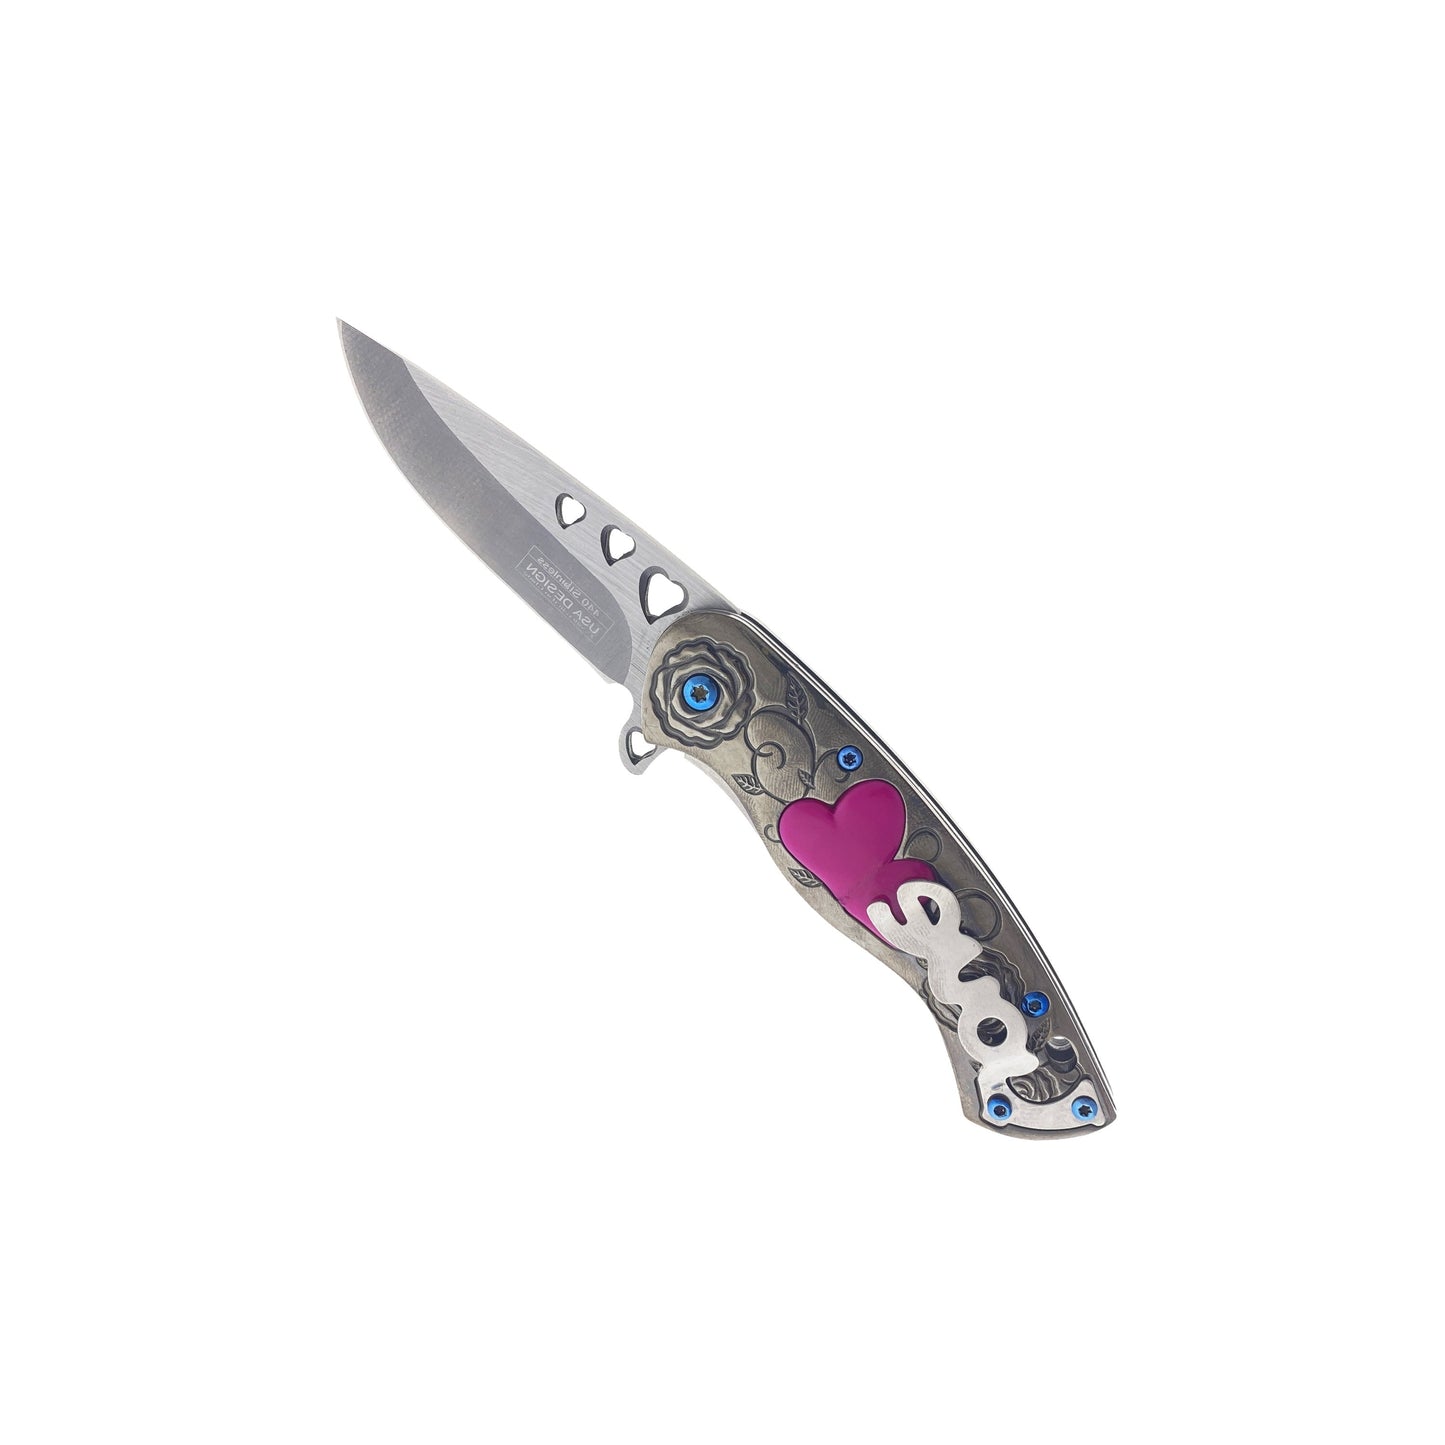 Falcon 7" Overall in Length Gray Handle w/ Pink Heart